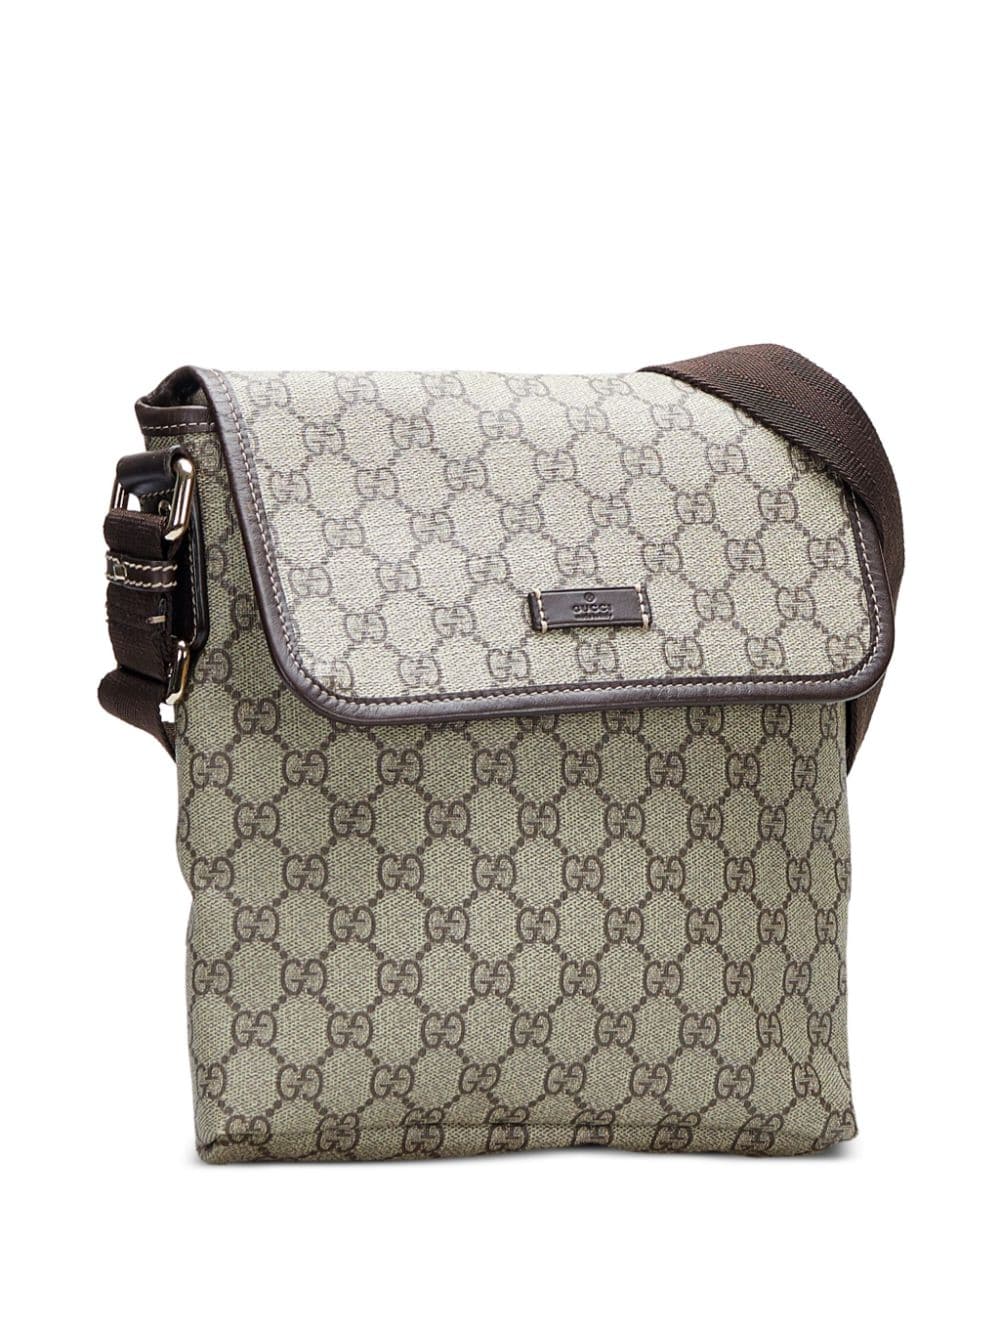 Pre-owned Gucci Gg Supreme Crossbody Bag In Brown | ModeSens